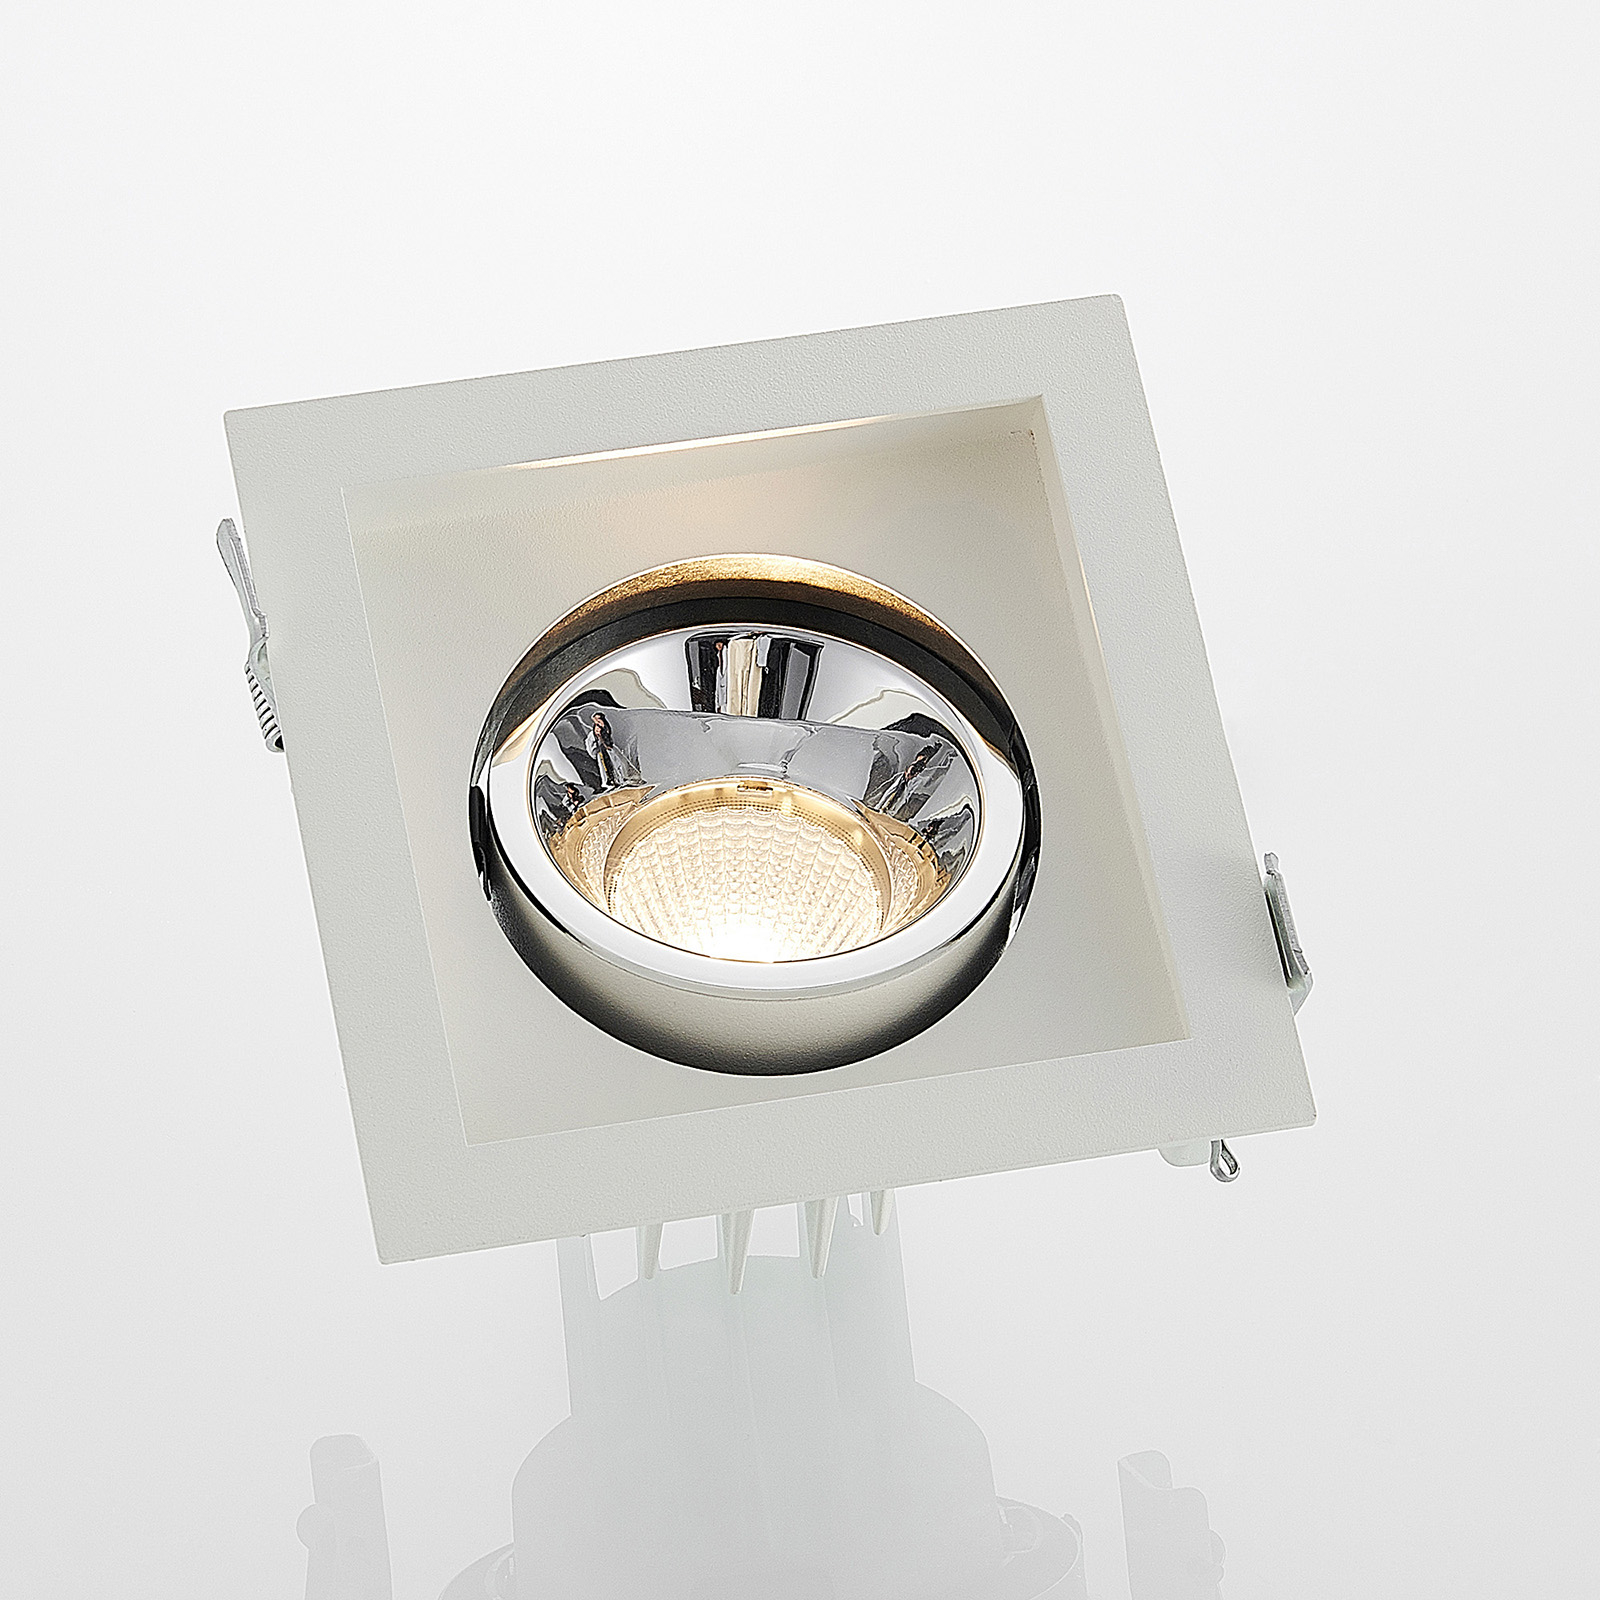 Arcchio Frode downlight LED ang., 3 000 K 12,6 W